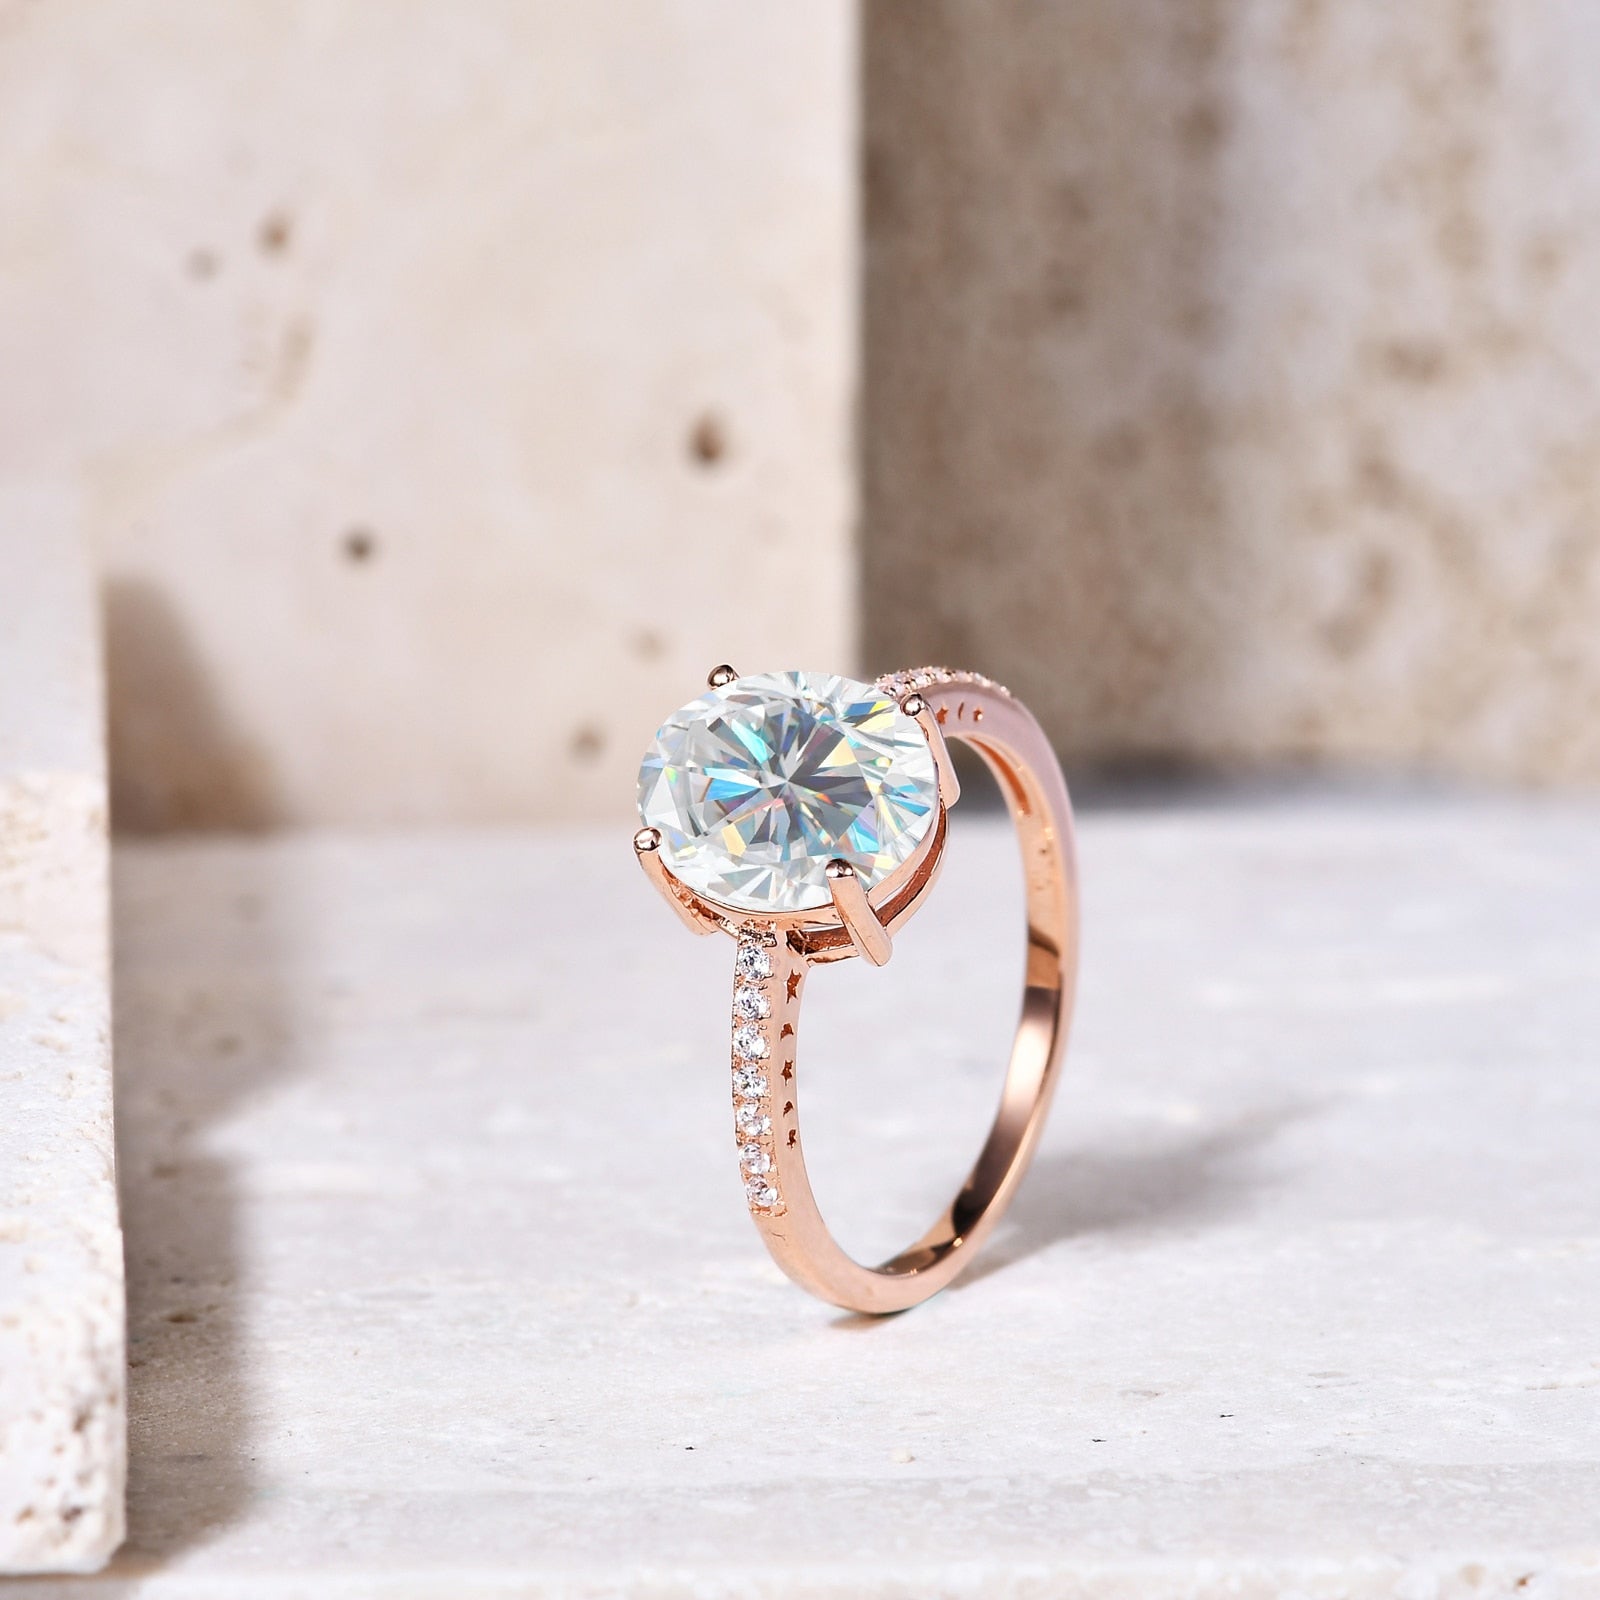 A rose gold pave band with moon and star cut outs on each side, set with a 3CT oval moissanite.